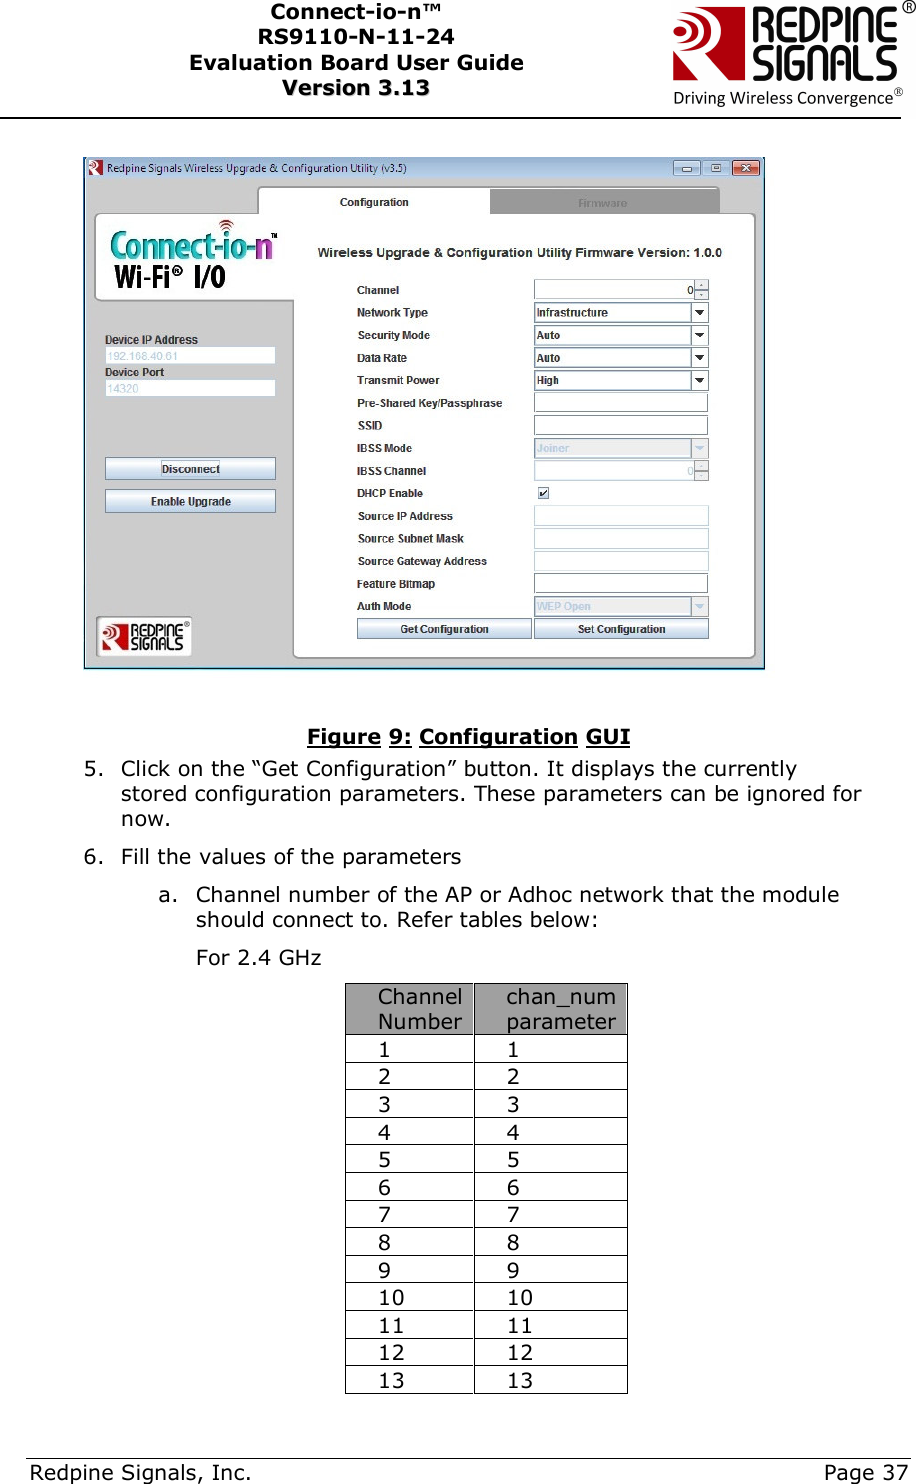      Redpine Signals, Inc.     Page 37 Connect-io-n™ RS9110-N-11-24  Evaluation Board User Guide  VVeerrssiioonn  33..1133      Figure 9: Configuration GUI 5. Click on the “Get Configuration” button. It displays the currently stored configuration parameters. These parameters can be ignored for now. 6. Fill the values of the parameters a. Channel number of the AP or Adhoc network that the module should connect to. Refer tables below: For 2.4 GHz Channel Number chan_num parameter 1  1 2  2 3  3 4  4 5  5 6  6 7  7 8  8 9  9 10  10 11  11 12  12 13  13 